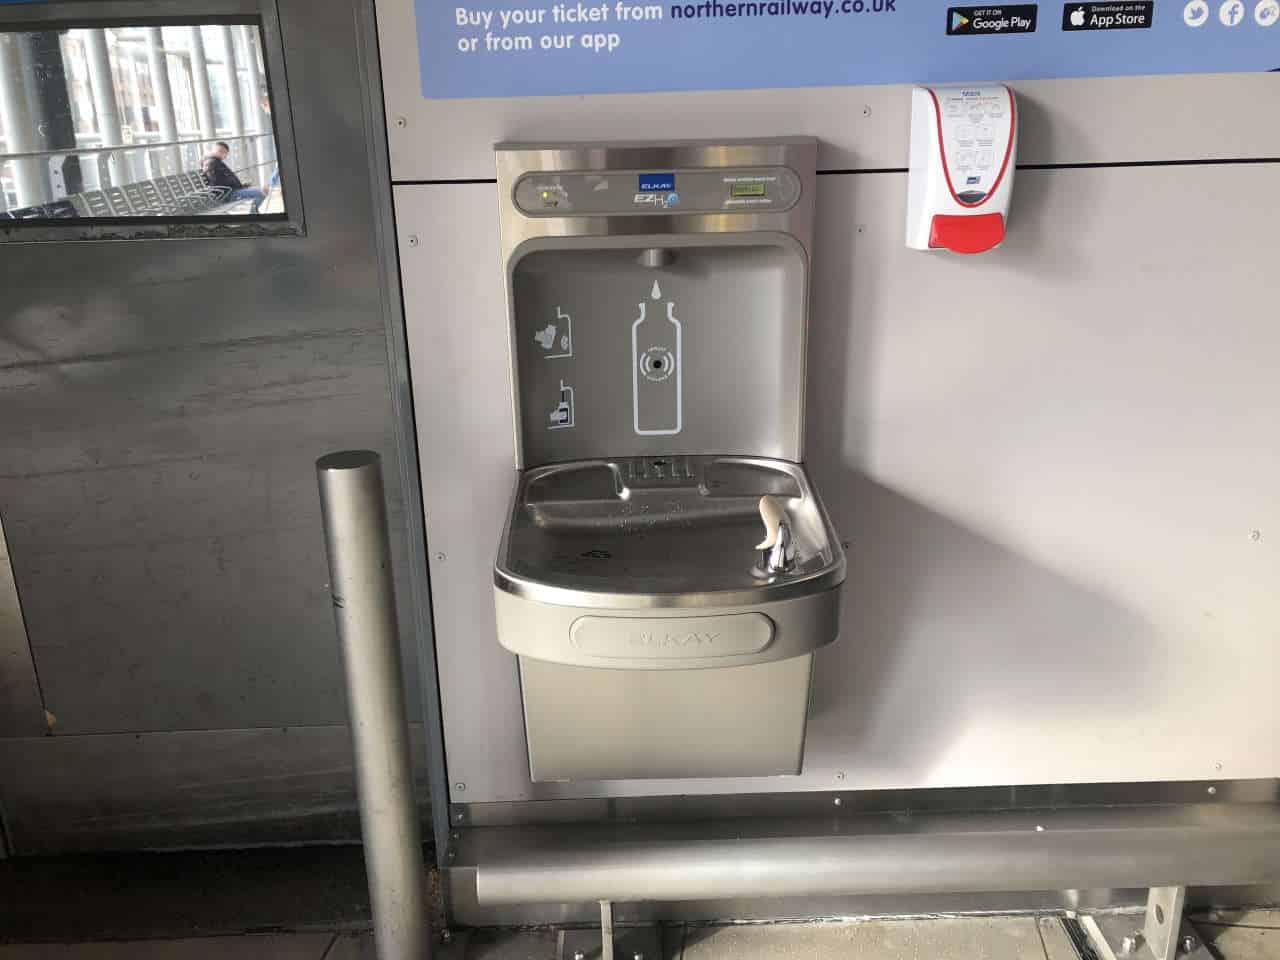 Passengers take on plastic pollution at Leeds railway station water fountain